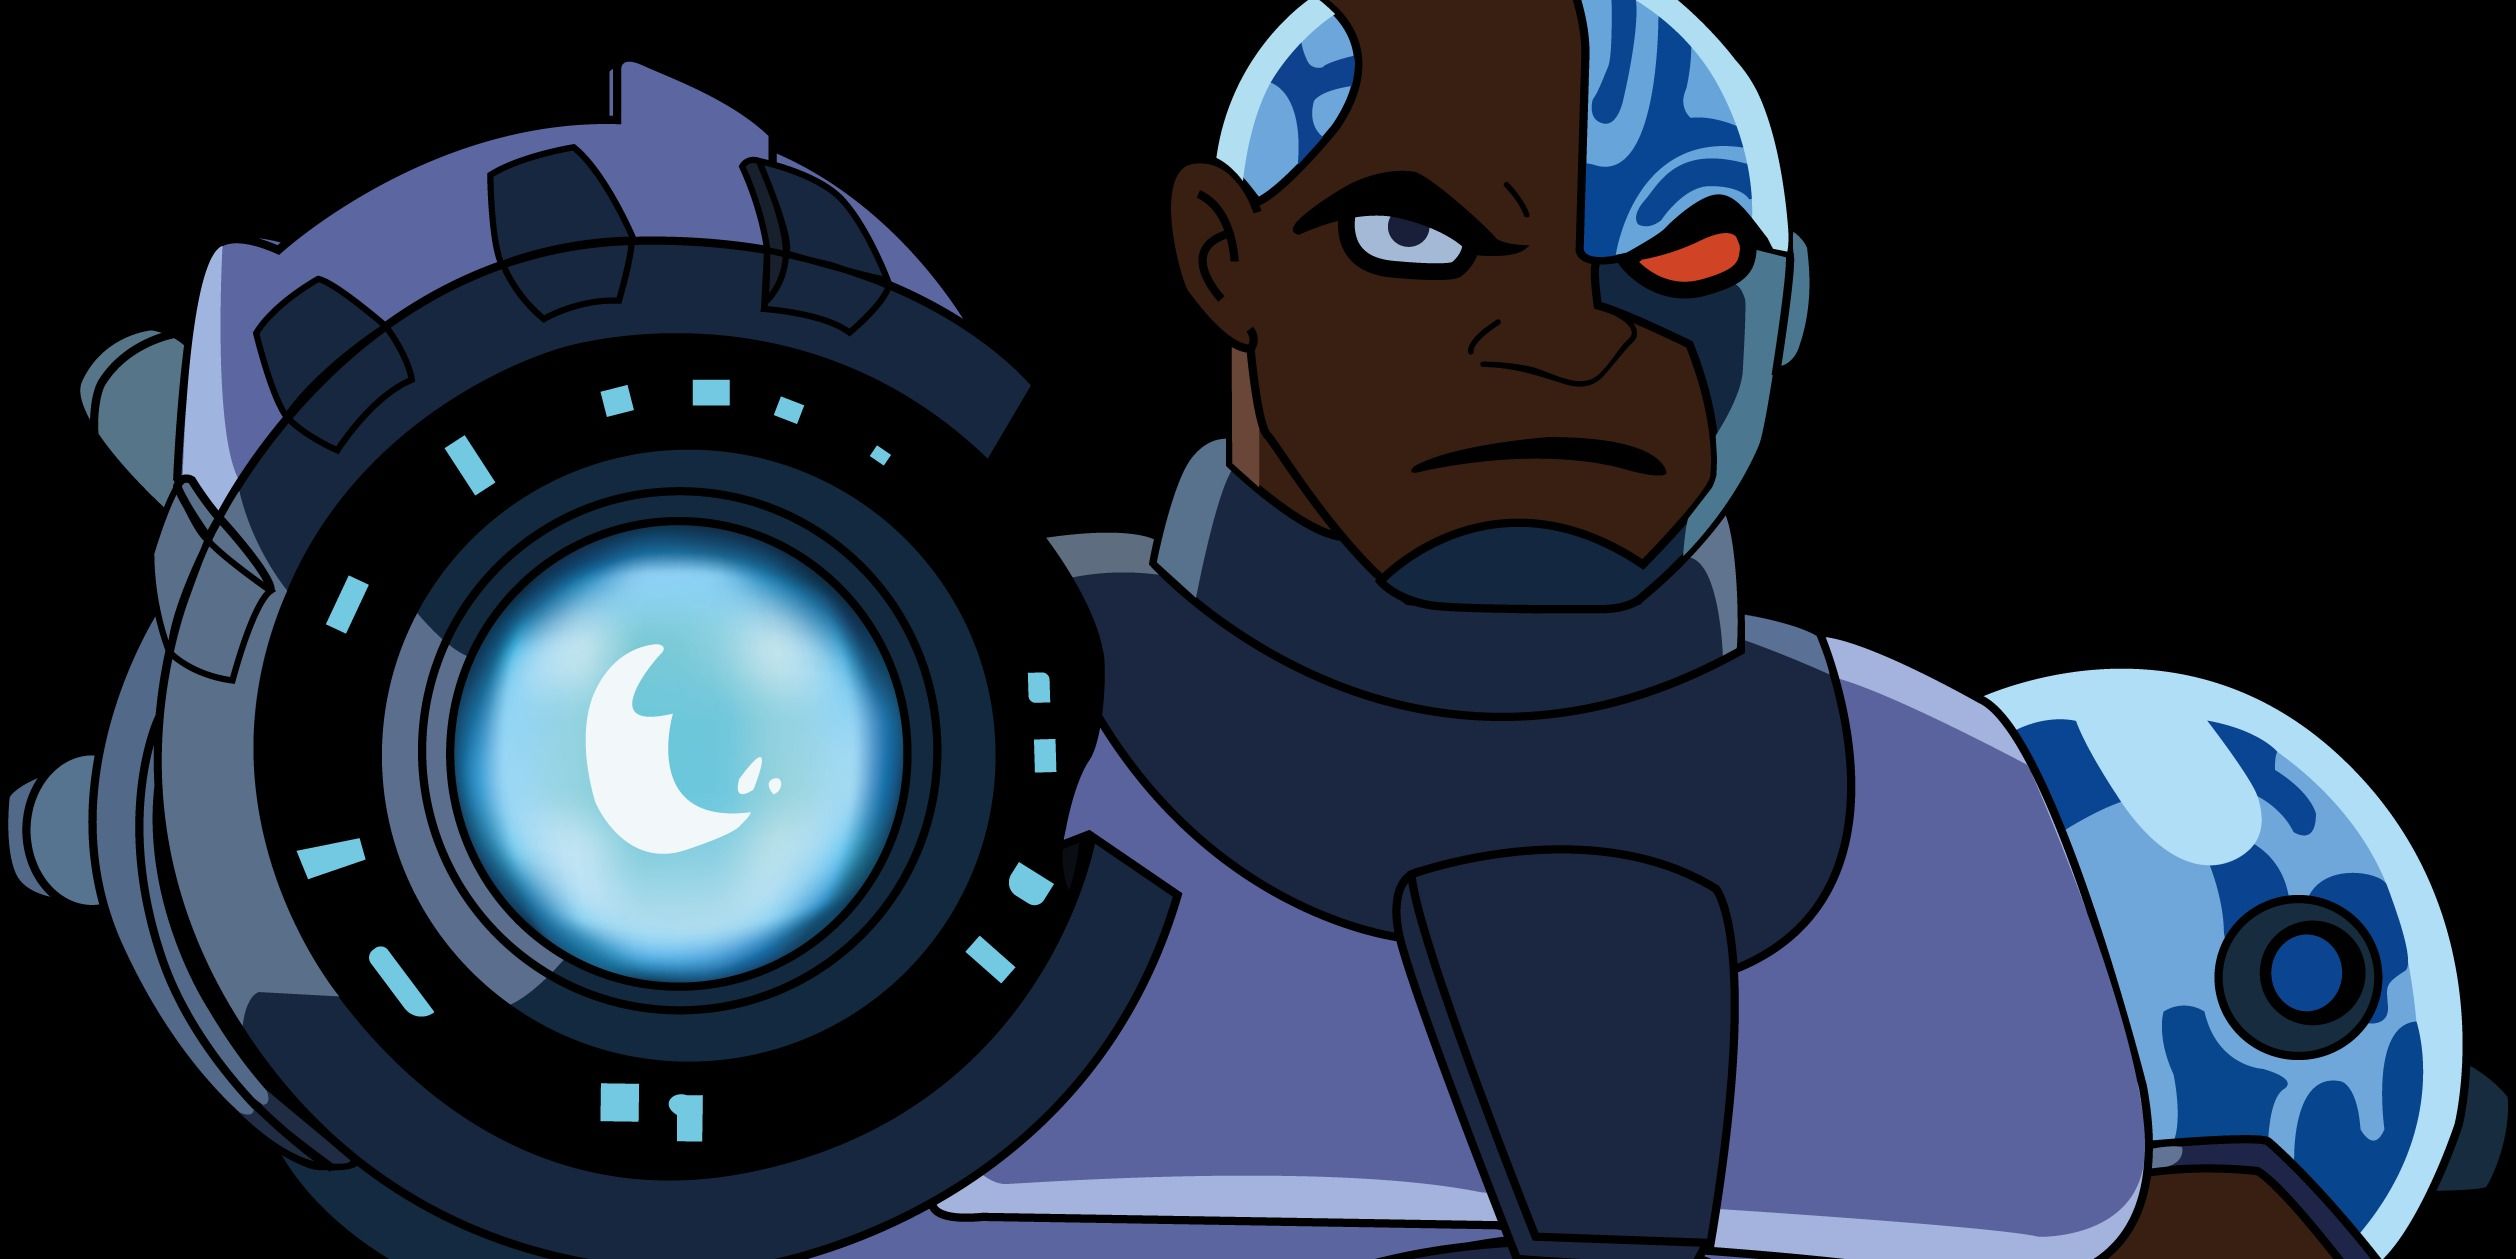 Cyborg looking serious and pointing his blaster arm in Teen Titans